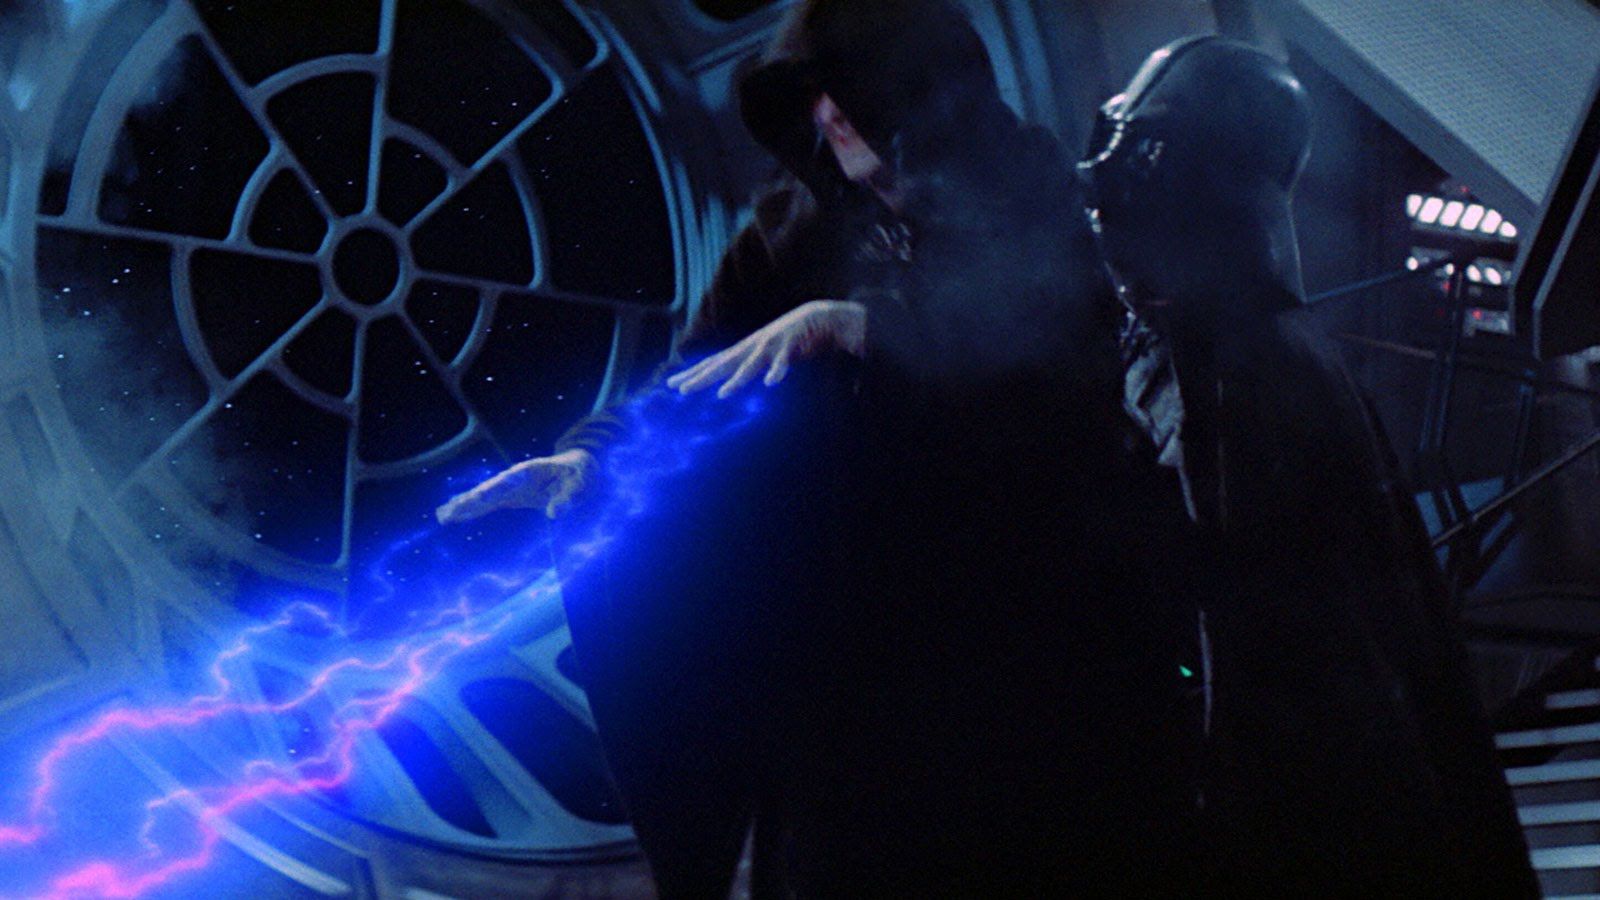 Darth Vader carrying Emperor Palpatine to the reactor shaft.